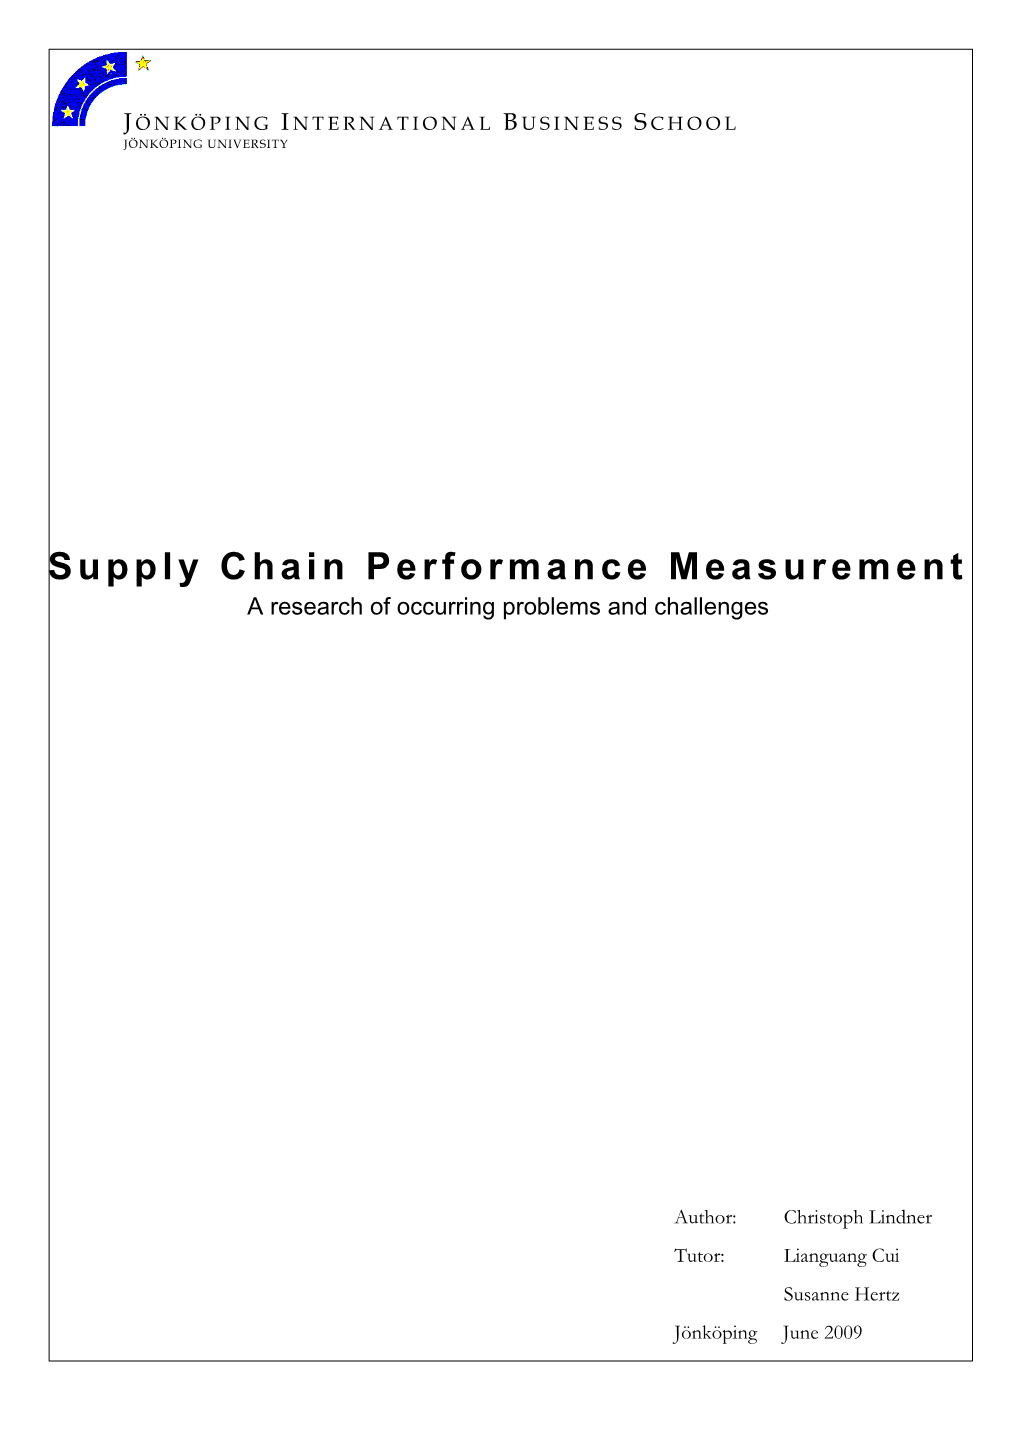 Supply Chain Performance Measurement a Research of Occurring Problems and Challenges